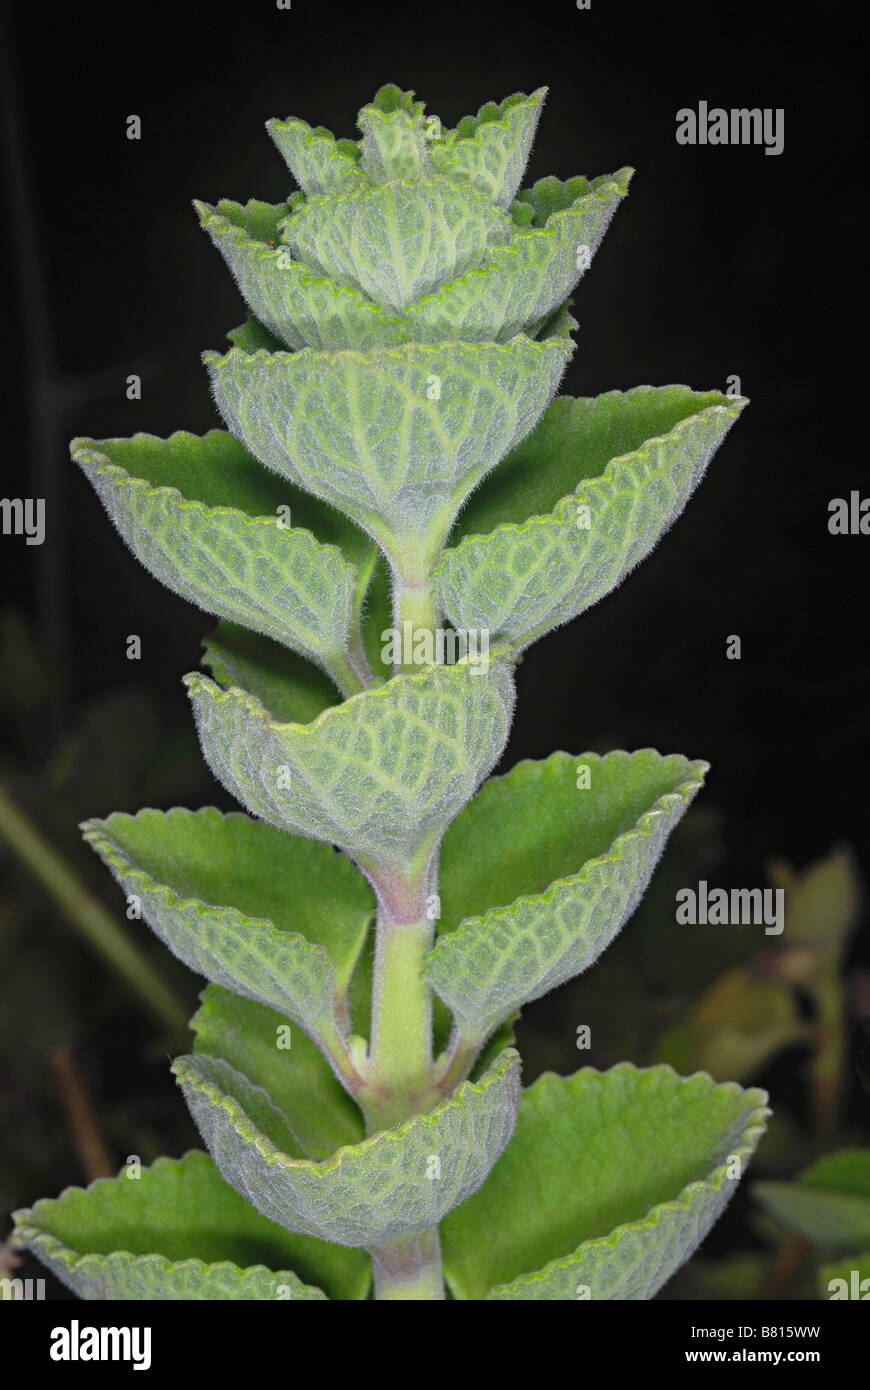 Plectranthus amboinicus. Tender fleshy perennial plant in the family Lamiaceae with an oregano-like flavor and odor Stock Photo